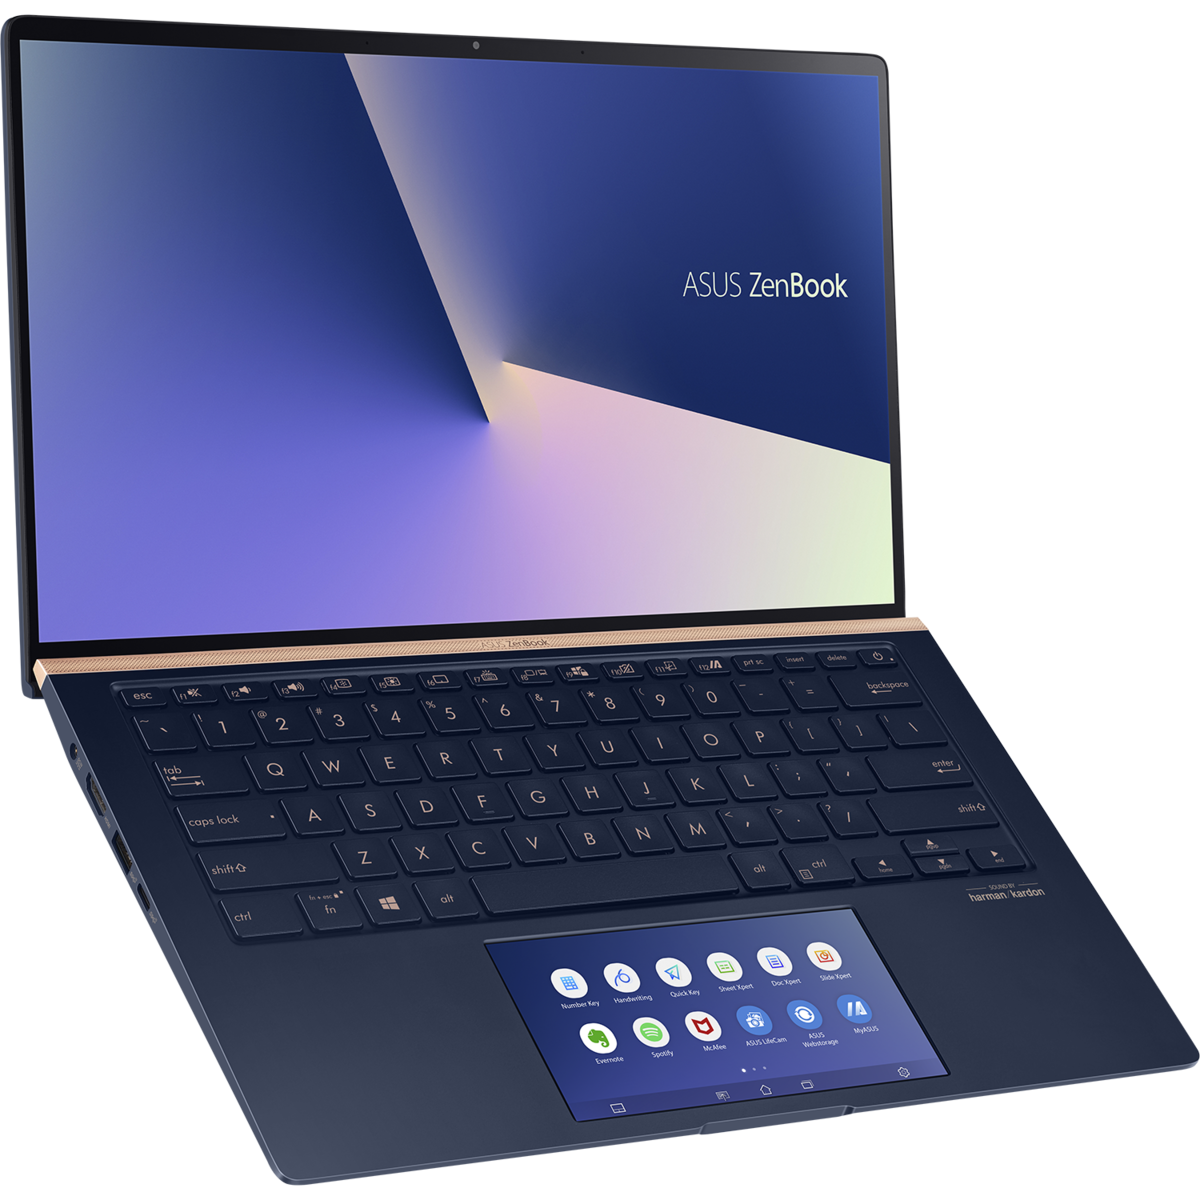 Asus announces the new ZenBook 13, 14, and 15 ultracompact laptops